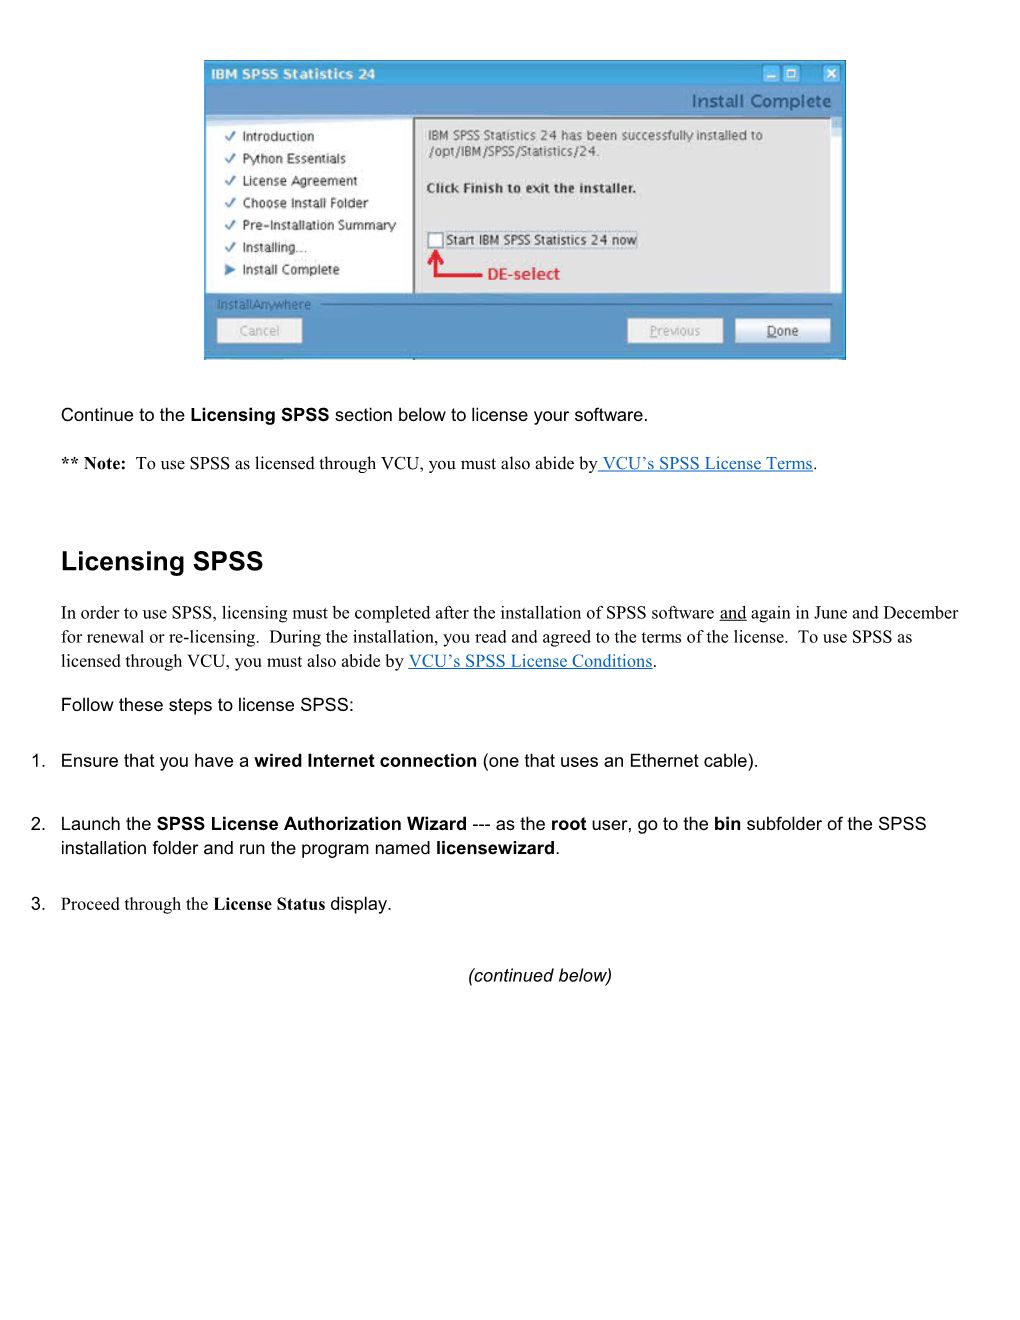 Installing and Licensing SPSS 24 for Linux